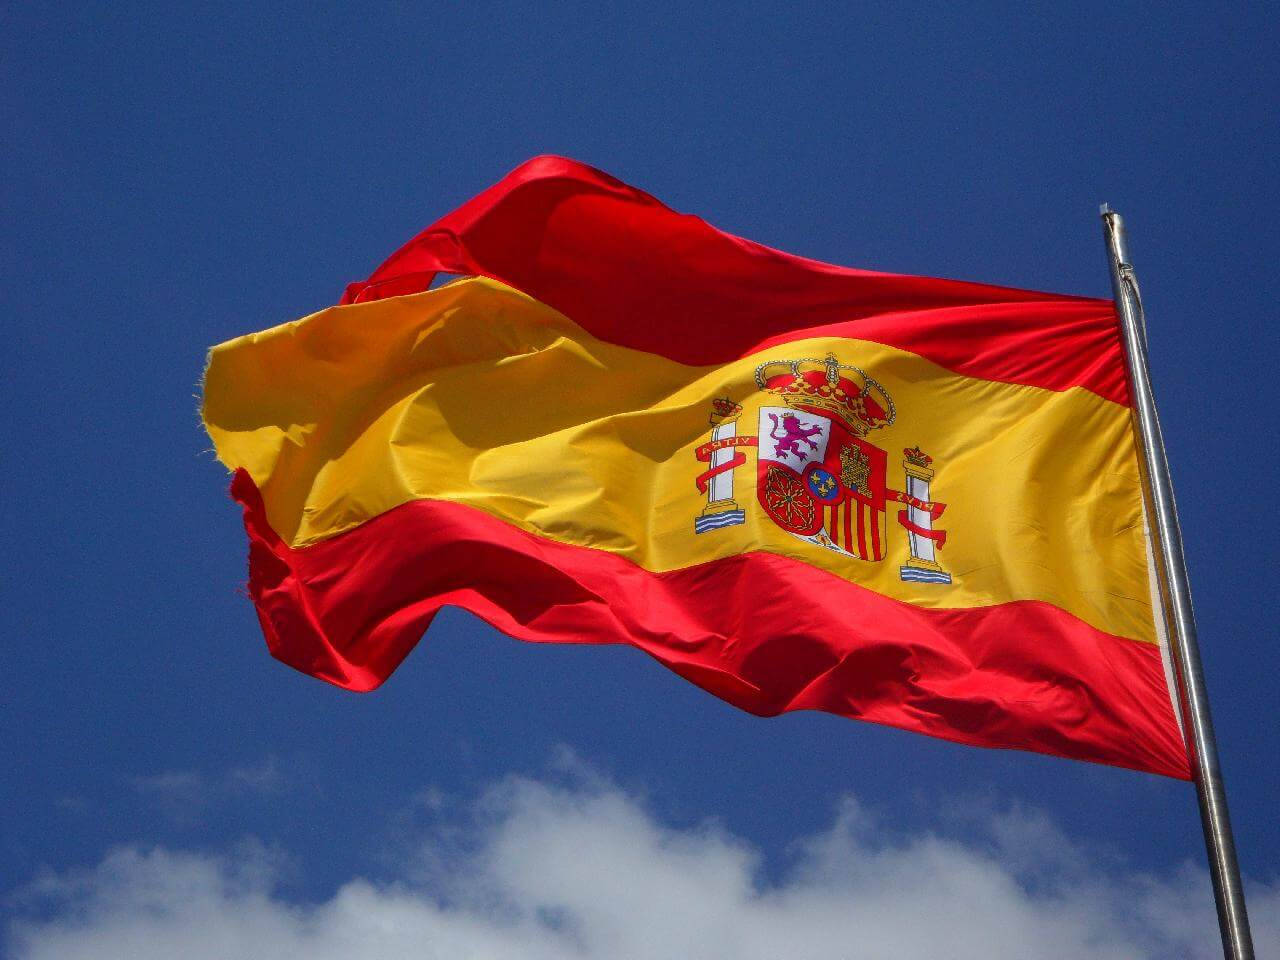 Caption: Spain's National Pride - Magnificent Spain Flag Soaring High Against The Clear Blue Sky